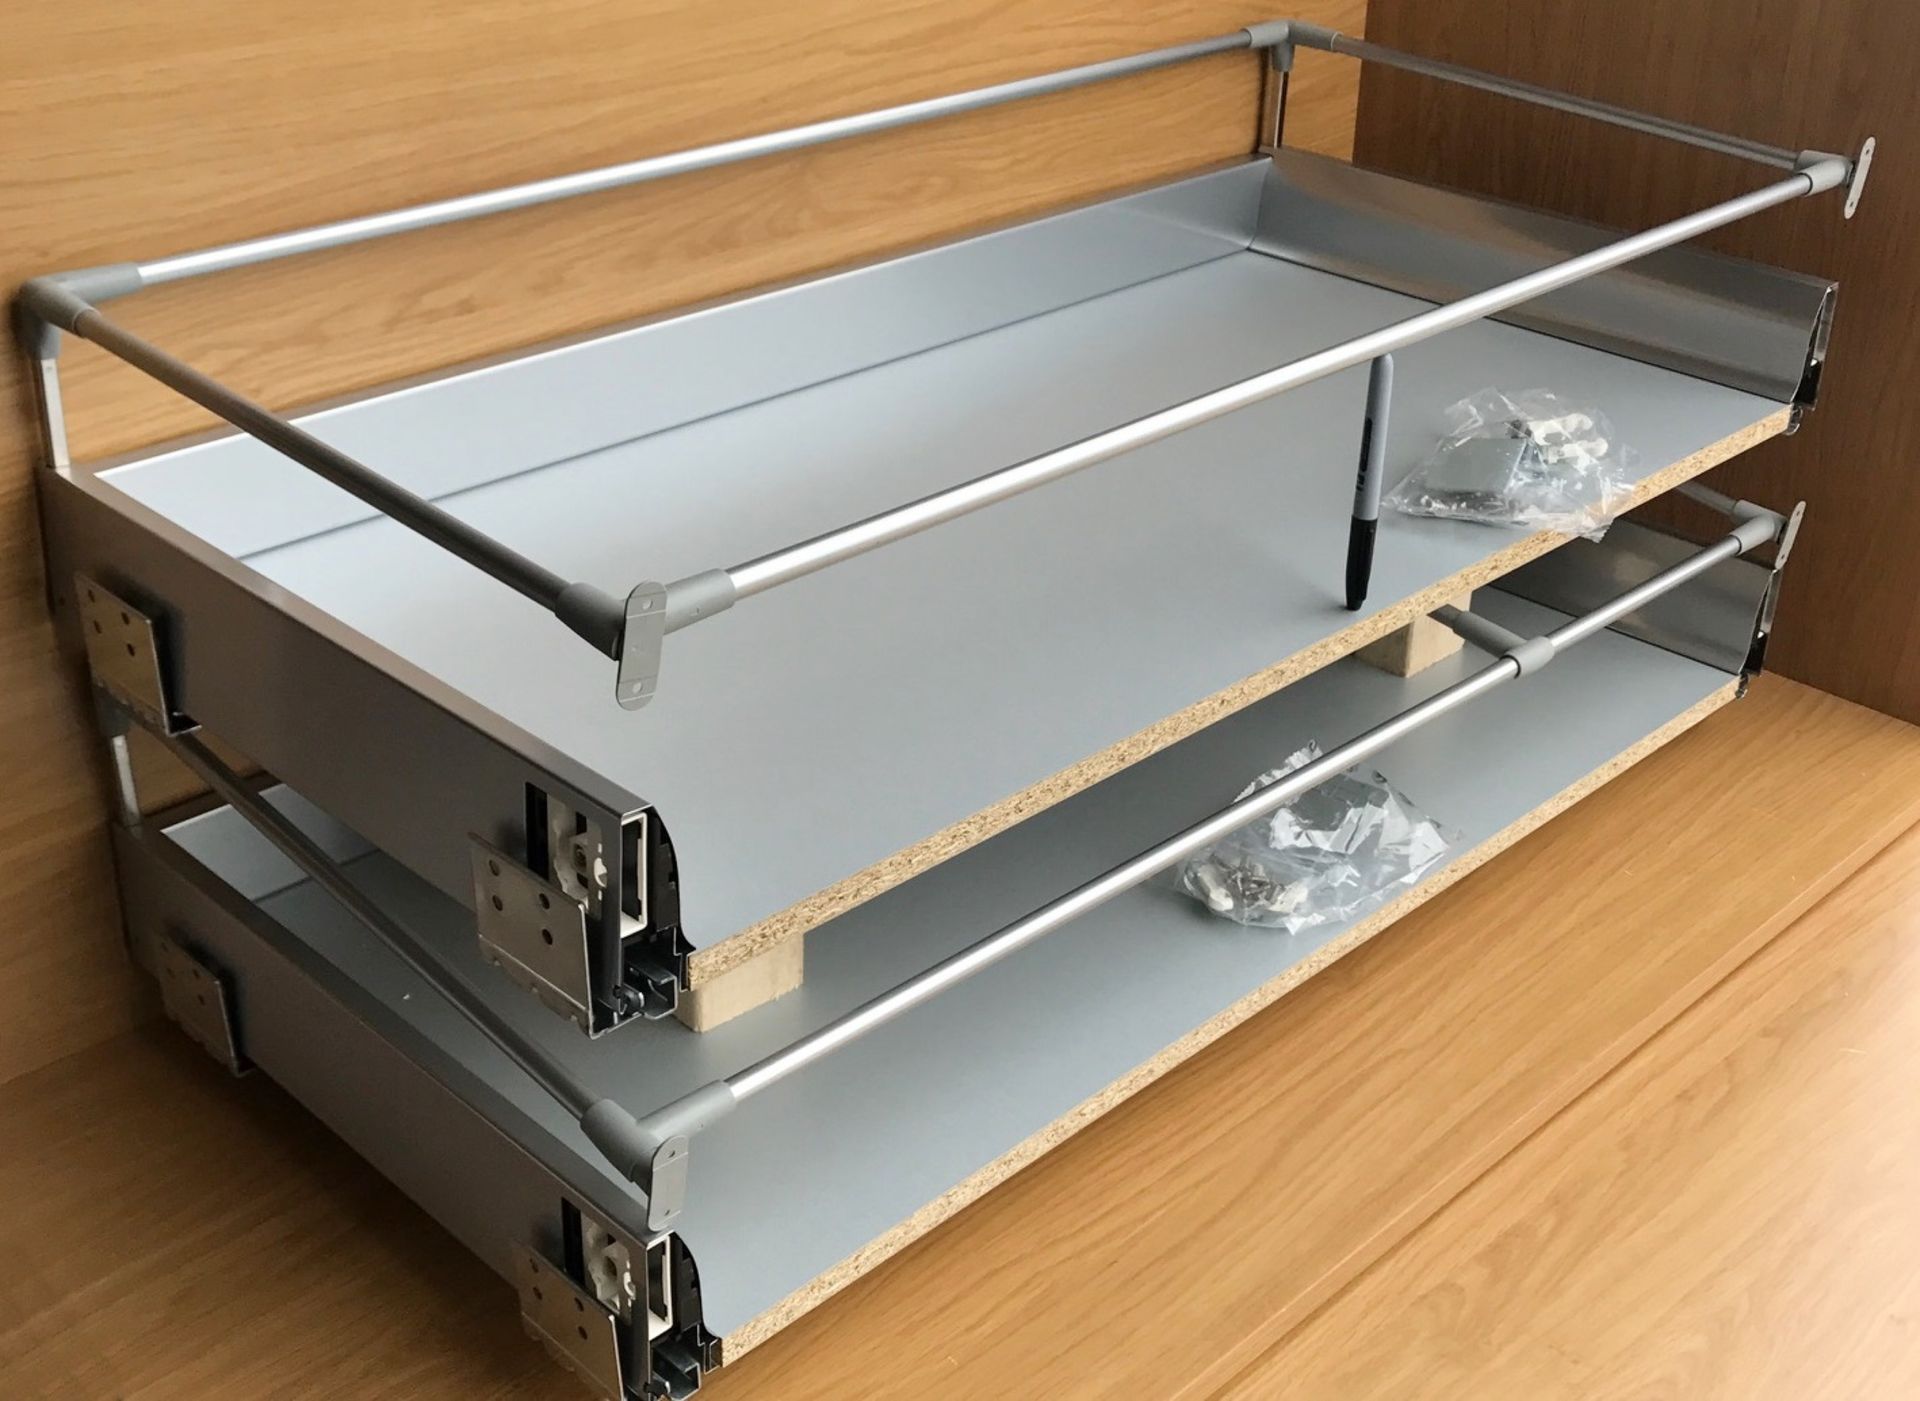 16x 1000mm Prestige Pan drawer twin packs includes 2 deep drawers, Features include soft close